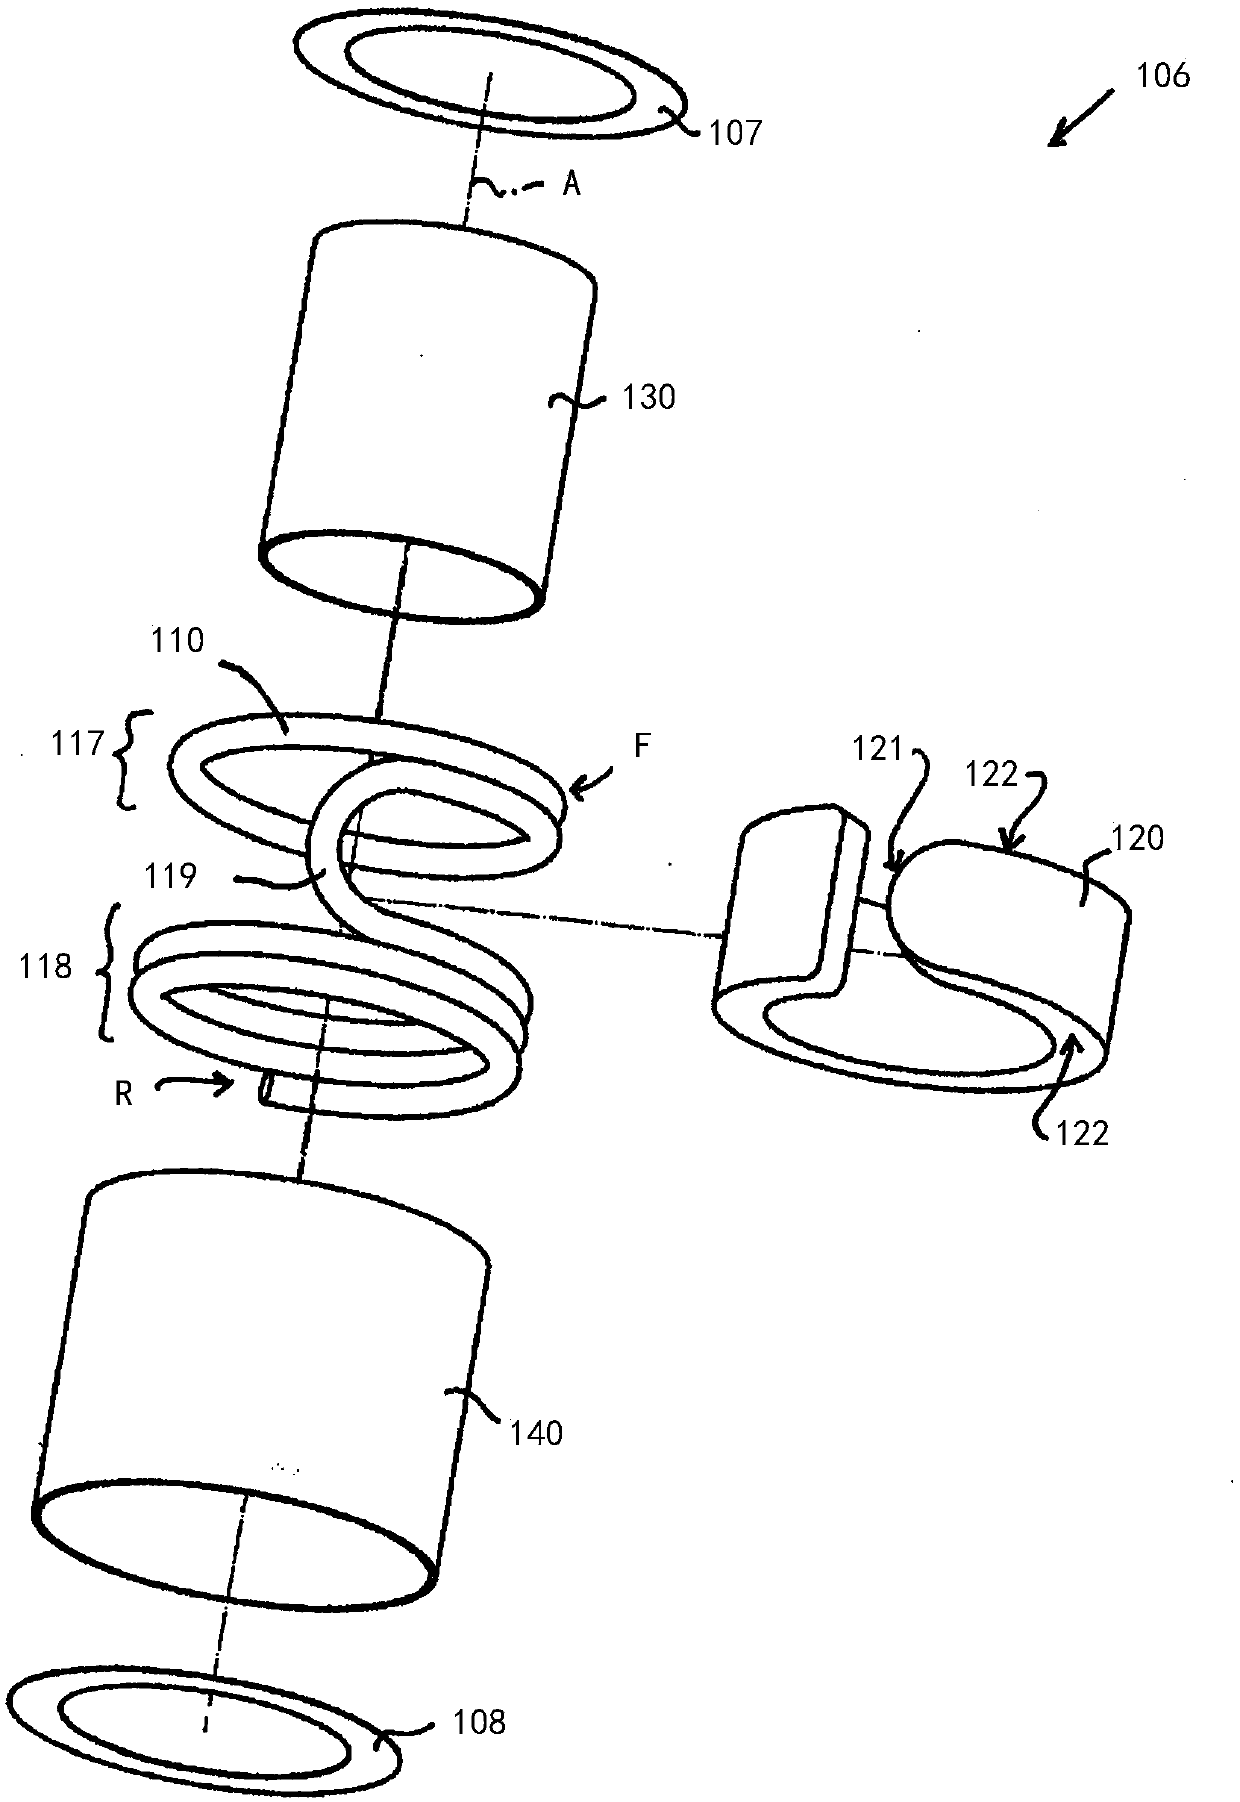 Routing system for at least one supply line which can be coiled and uncoiled, and rotary guide therefor